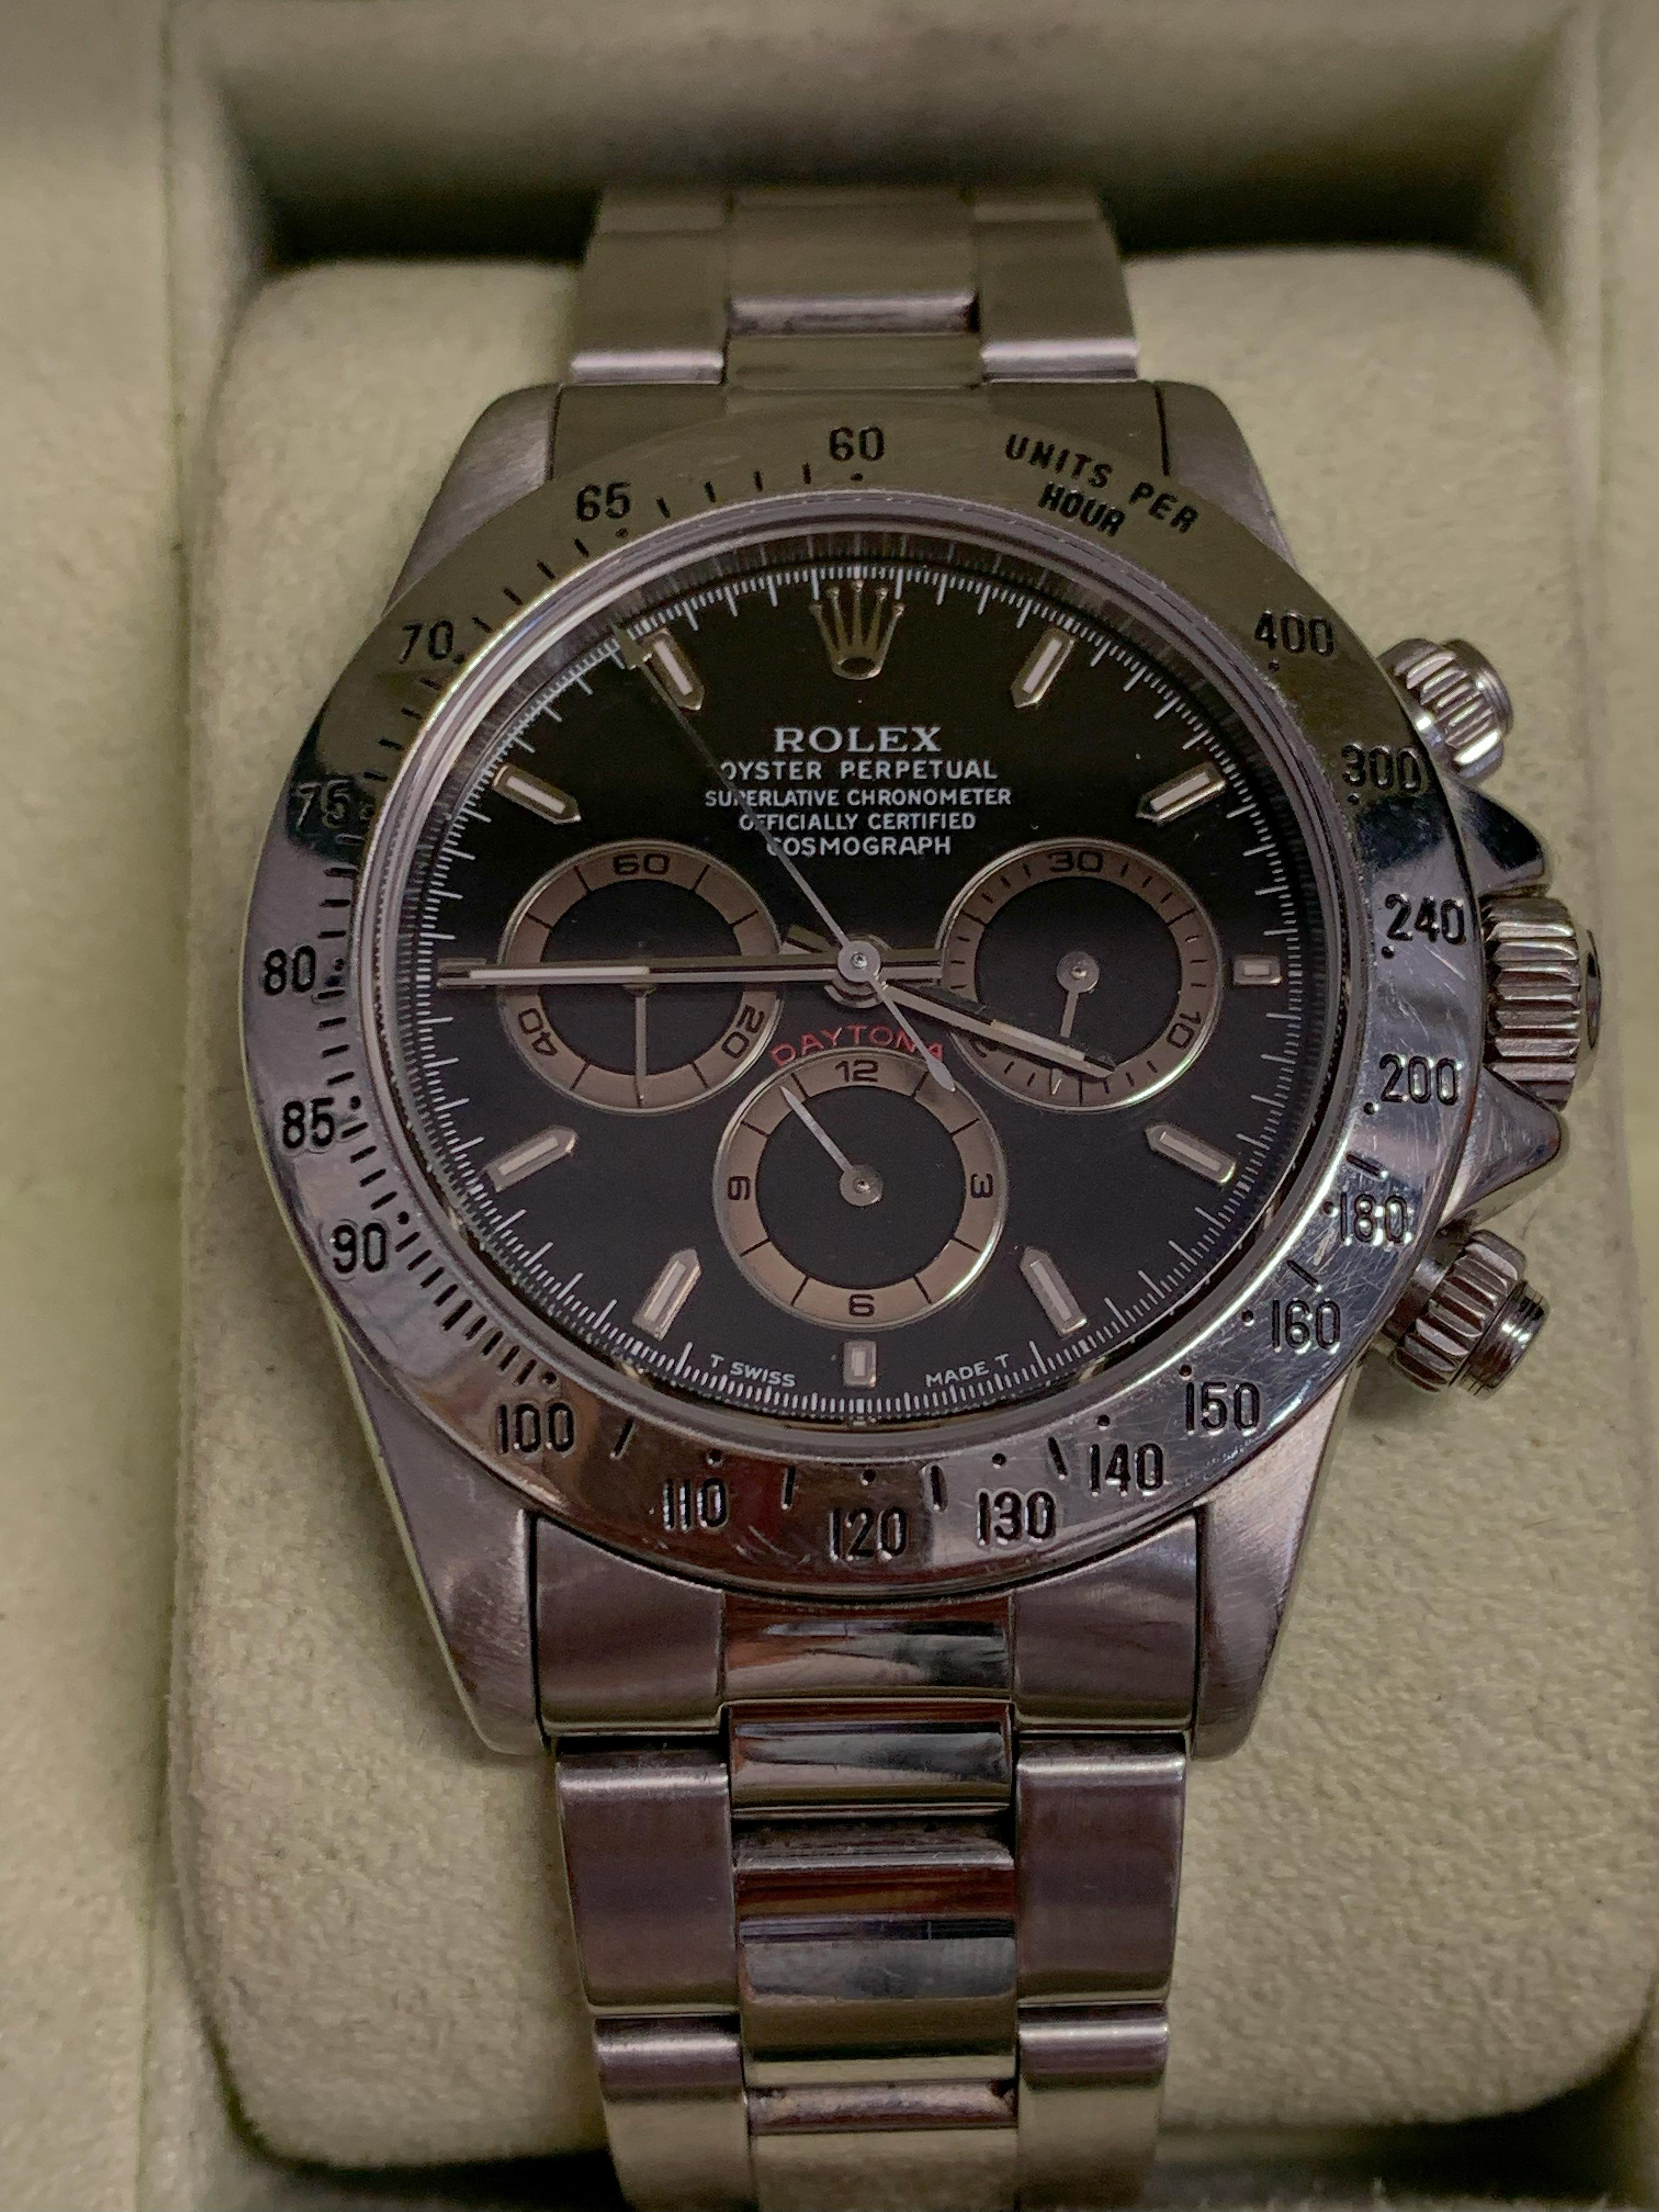 ROLEX DAYTONA COSMOGRAPH WATCH W/ DEEP PATRIZZI DIAL & ZENITH MOVEMENT


ITEM DESCRIPTION: 

If you are looking for a classic yet unique watch to make a statement, look no further than this Rolex Daytona Cosmograph. This men’s timepiece features a